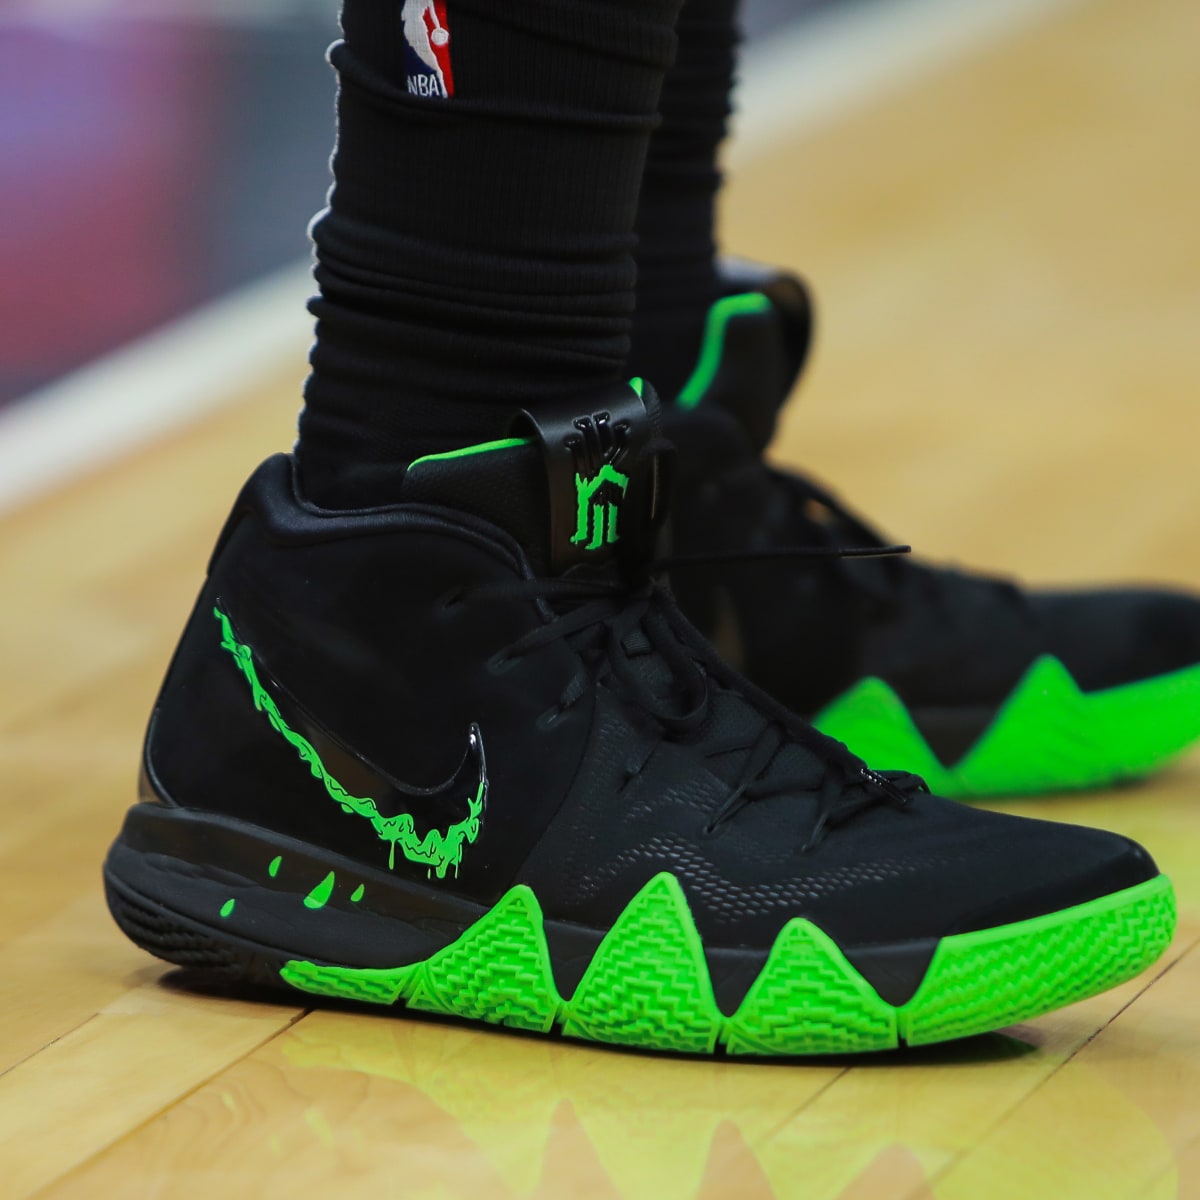 Ranking Top Five Halloween Basketball Shoes - Sports Illustrated